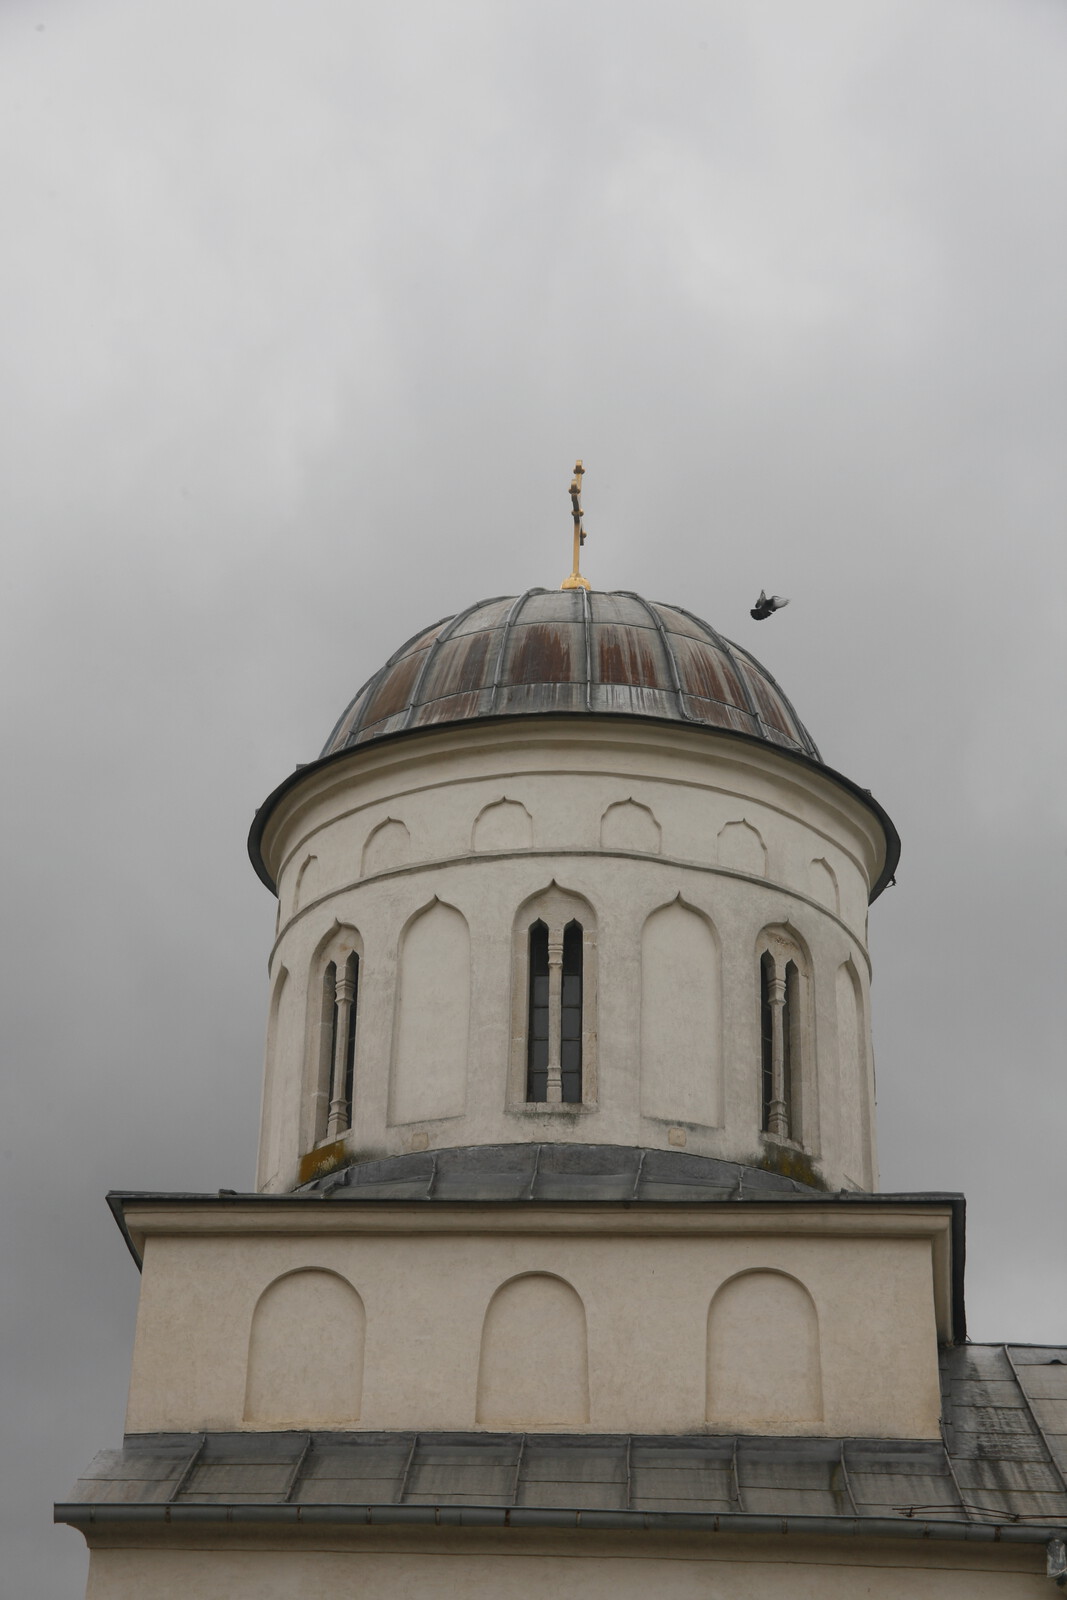 The main dome 